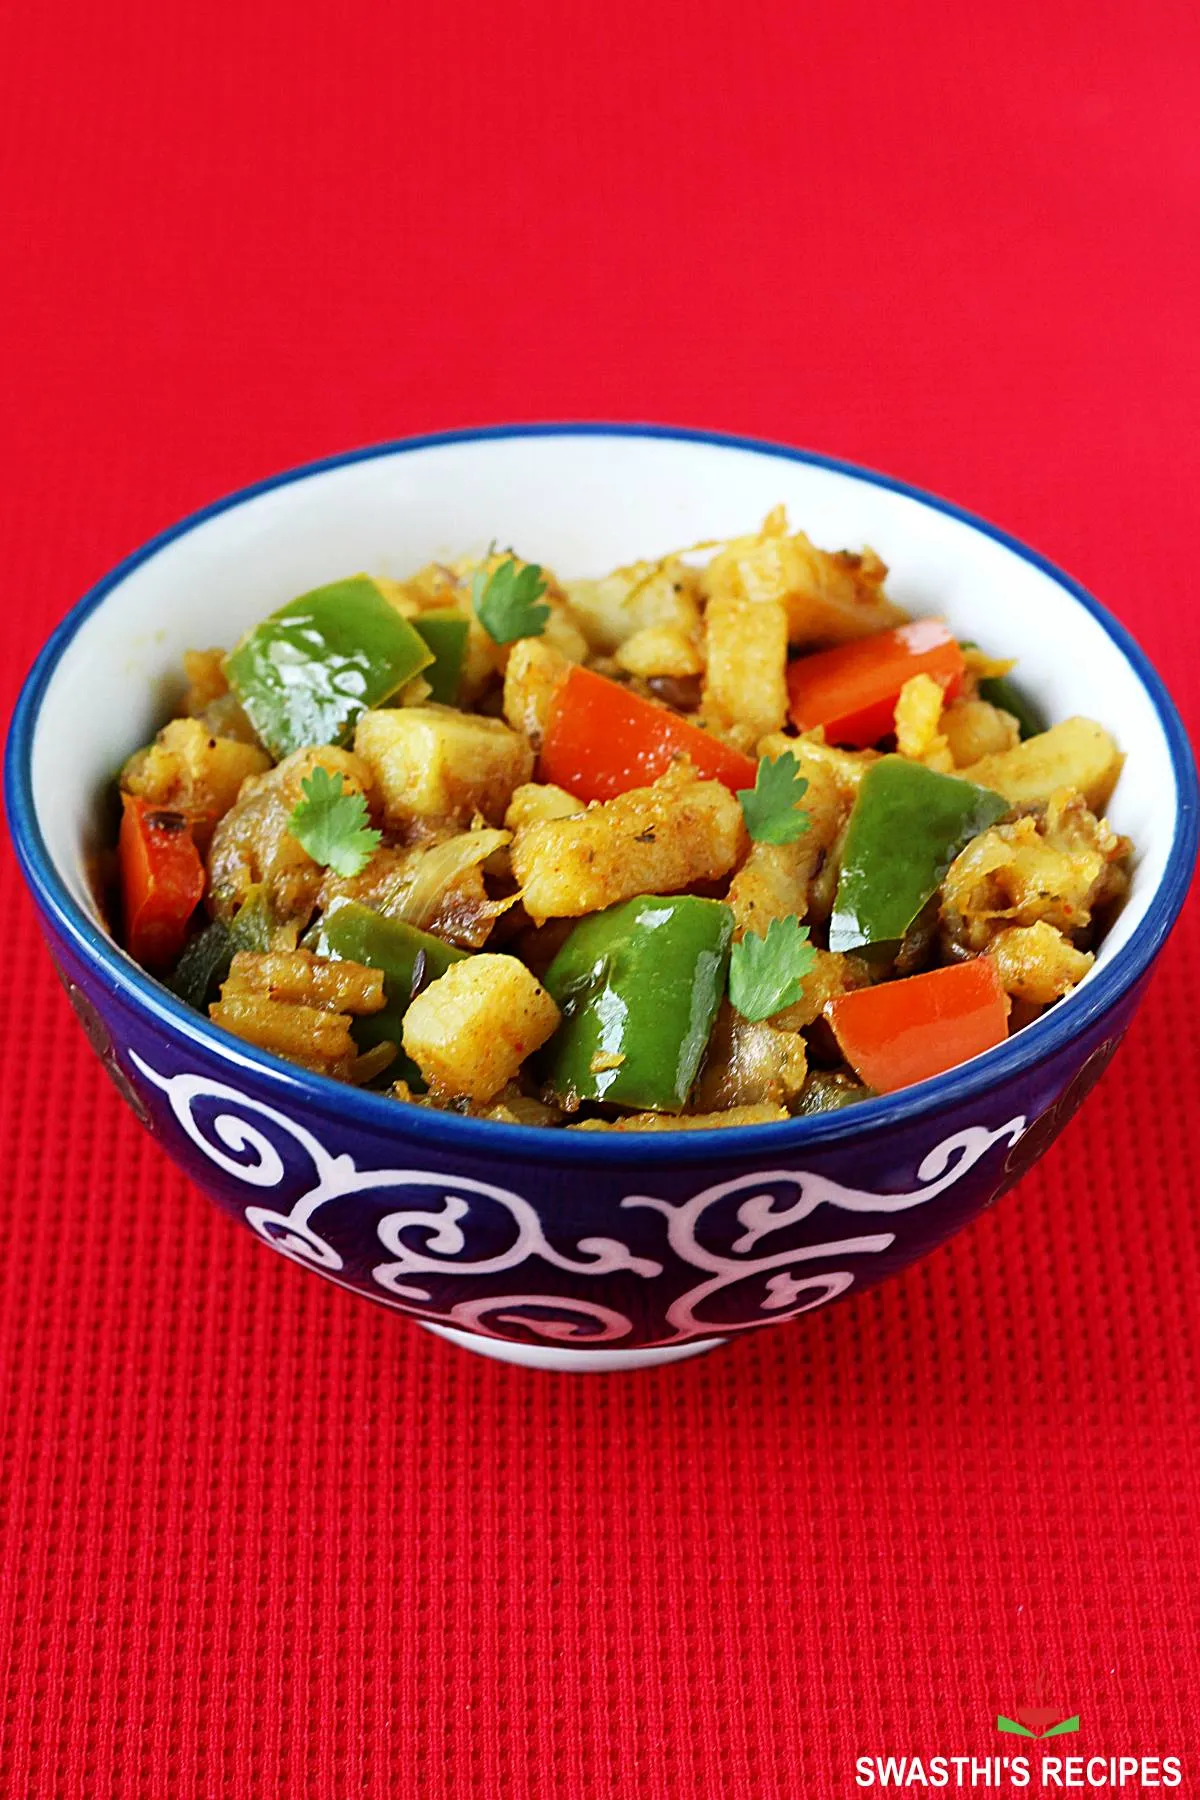 Aloo Capsicum made with potato, bell peppers and spices